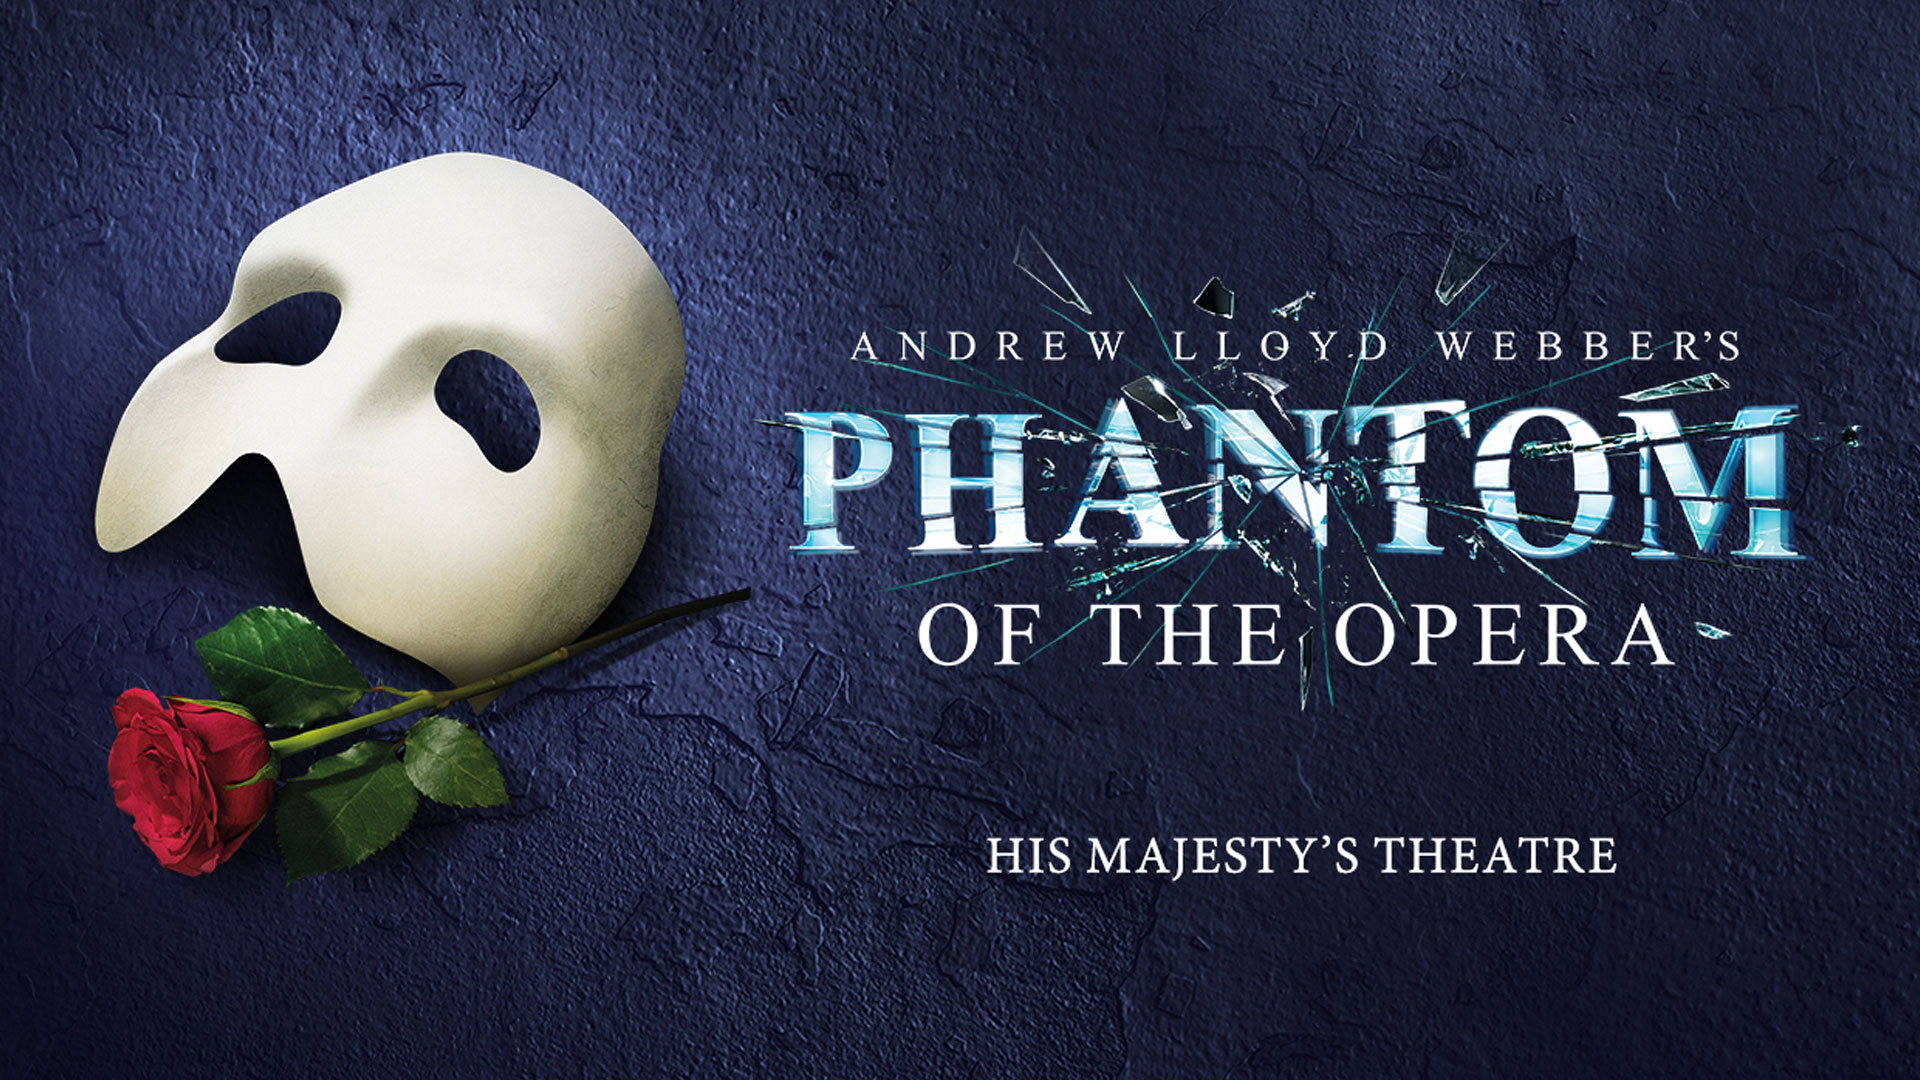 The Phantom of the Opera at Her Majesty's Theatre Musical